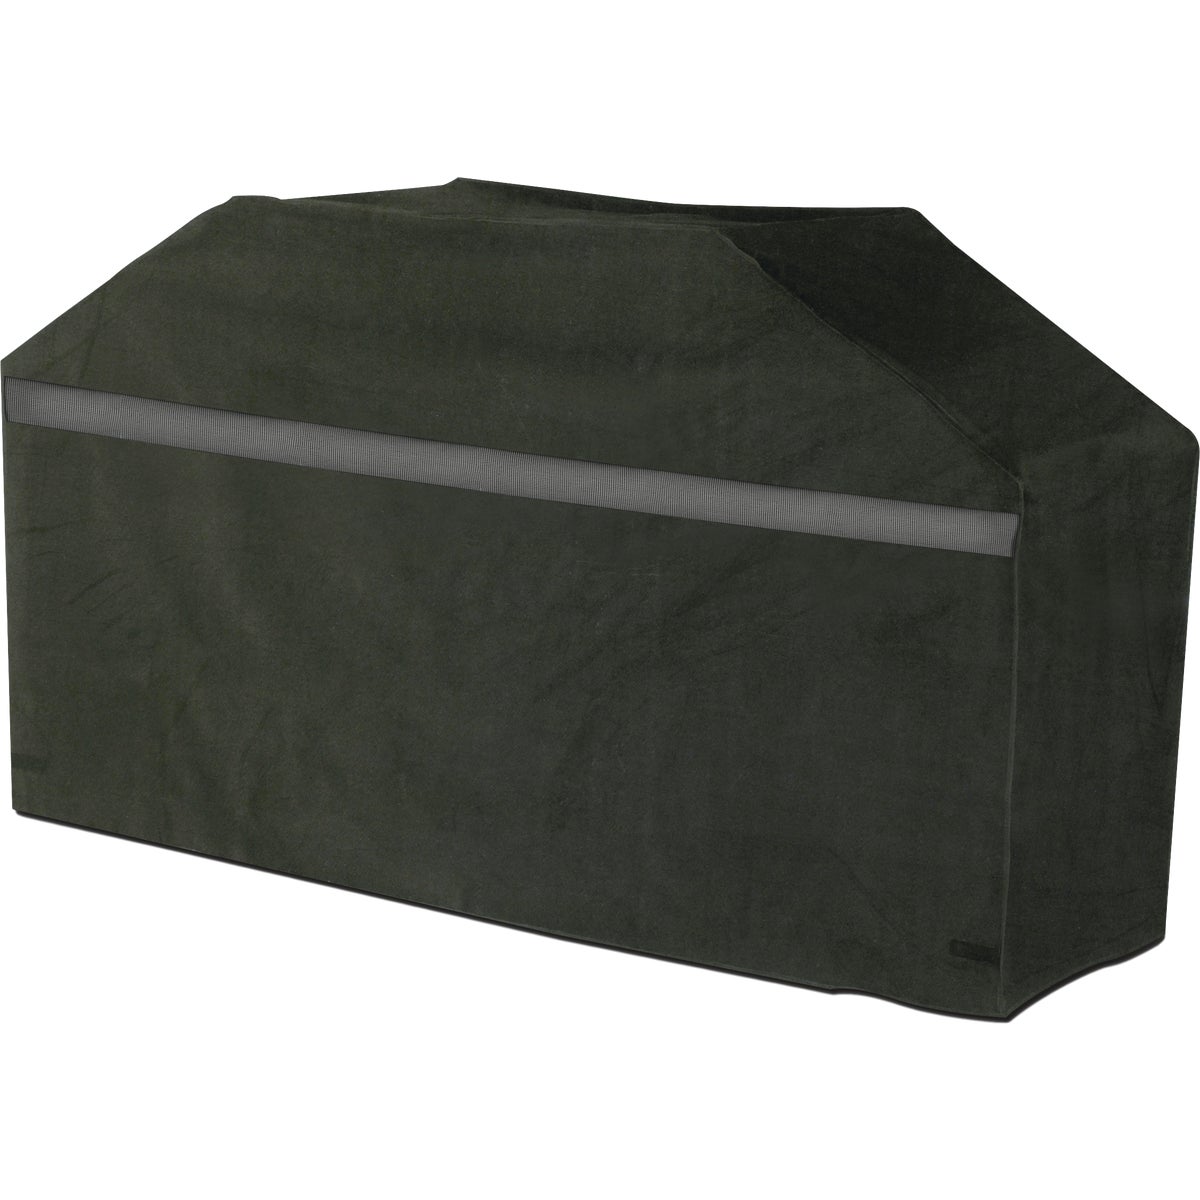 Dyna Glo 60 In. x 23 In. x 42 In. Polyester Heavy-Duty Gas Grill Cover